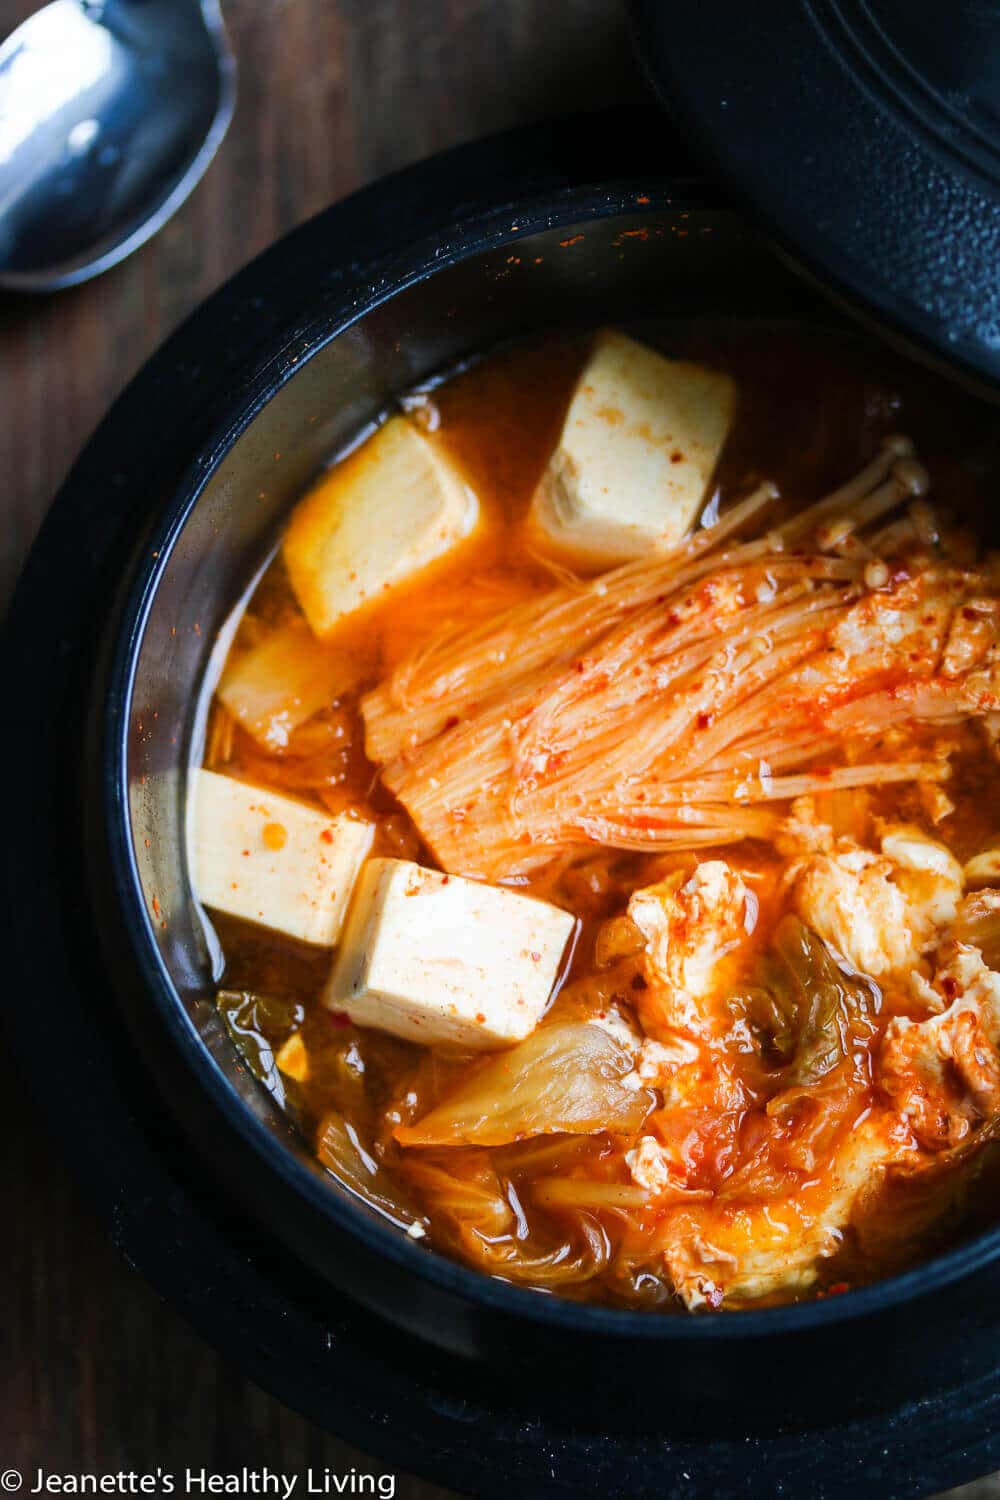 Spicy Kimchi Tofu Mushroom Egg Soup - great way to warm up your belly on a cold winter day. Korean kimchi and gochujang spice up this vegetarian soup, and tofu and egg provide the proteins.